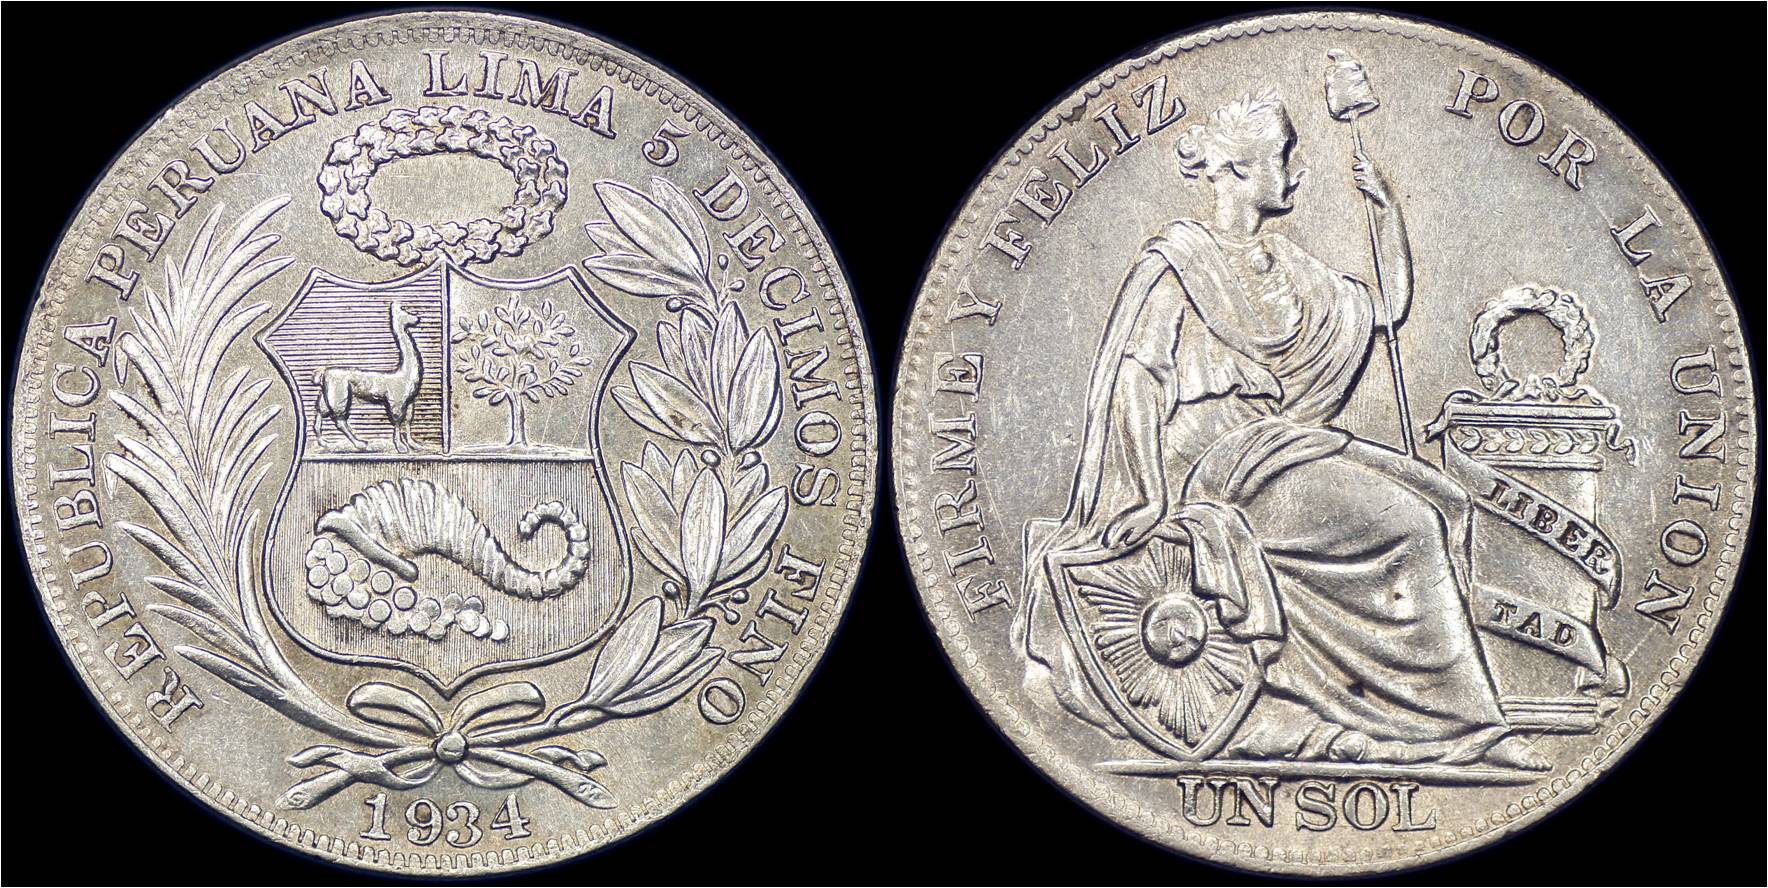 KM 218 Peru 1934 Sol large letters minted in Lima.jpg